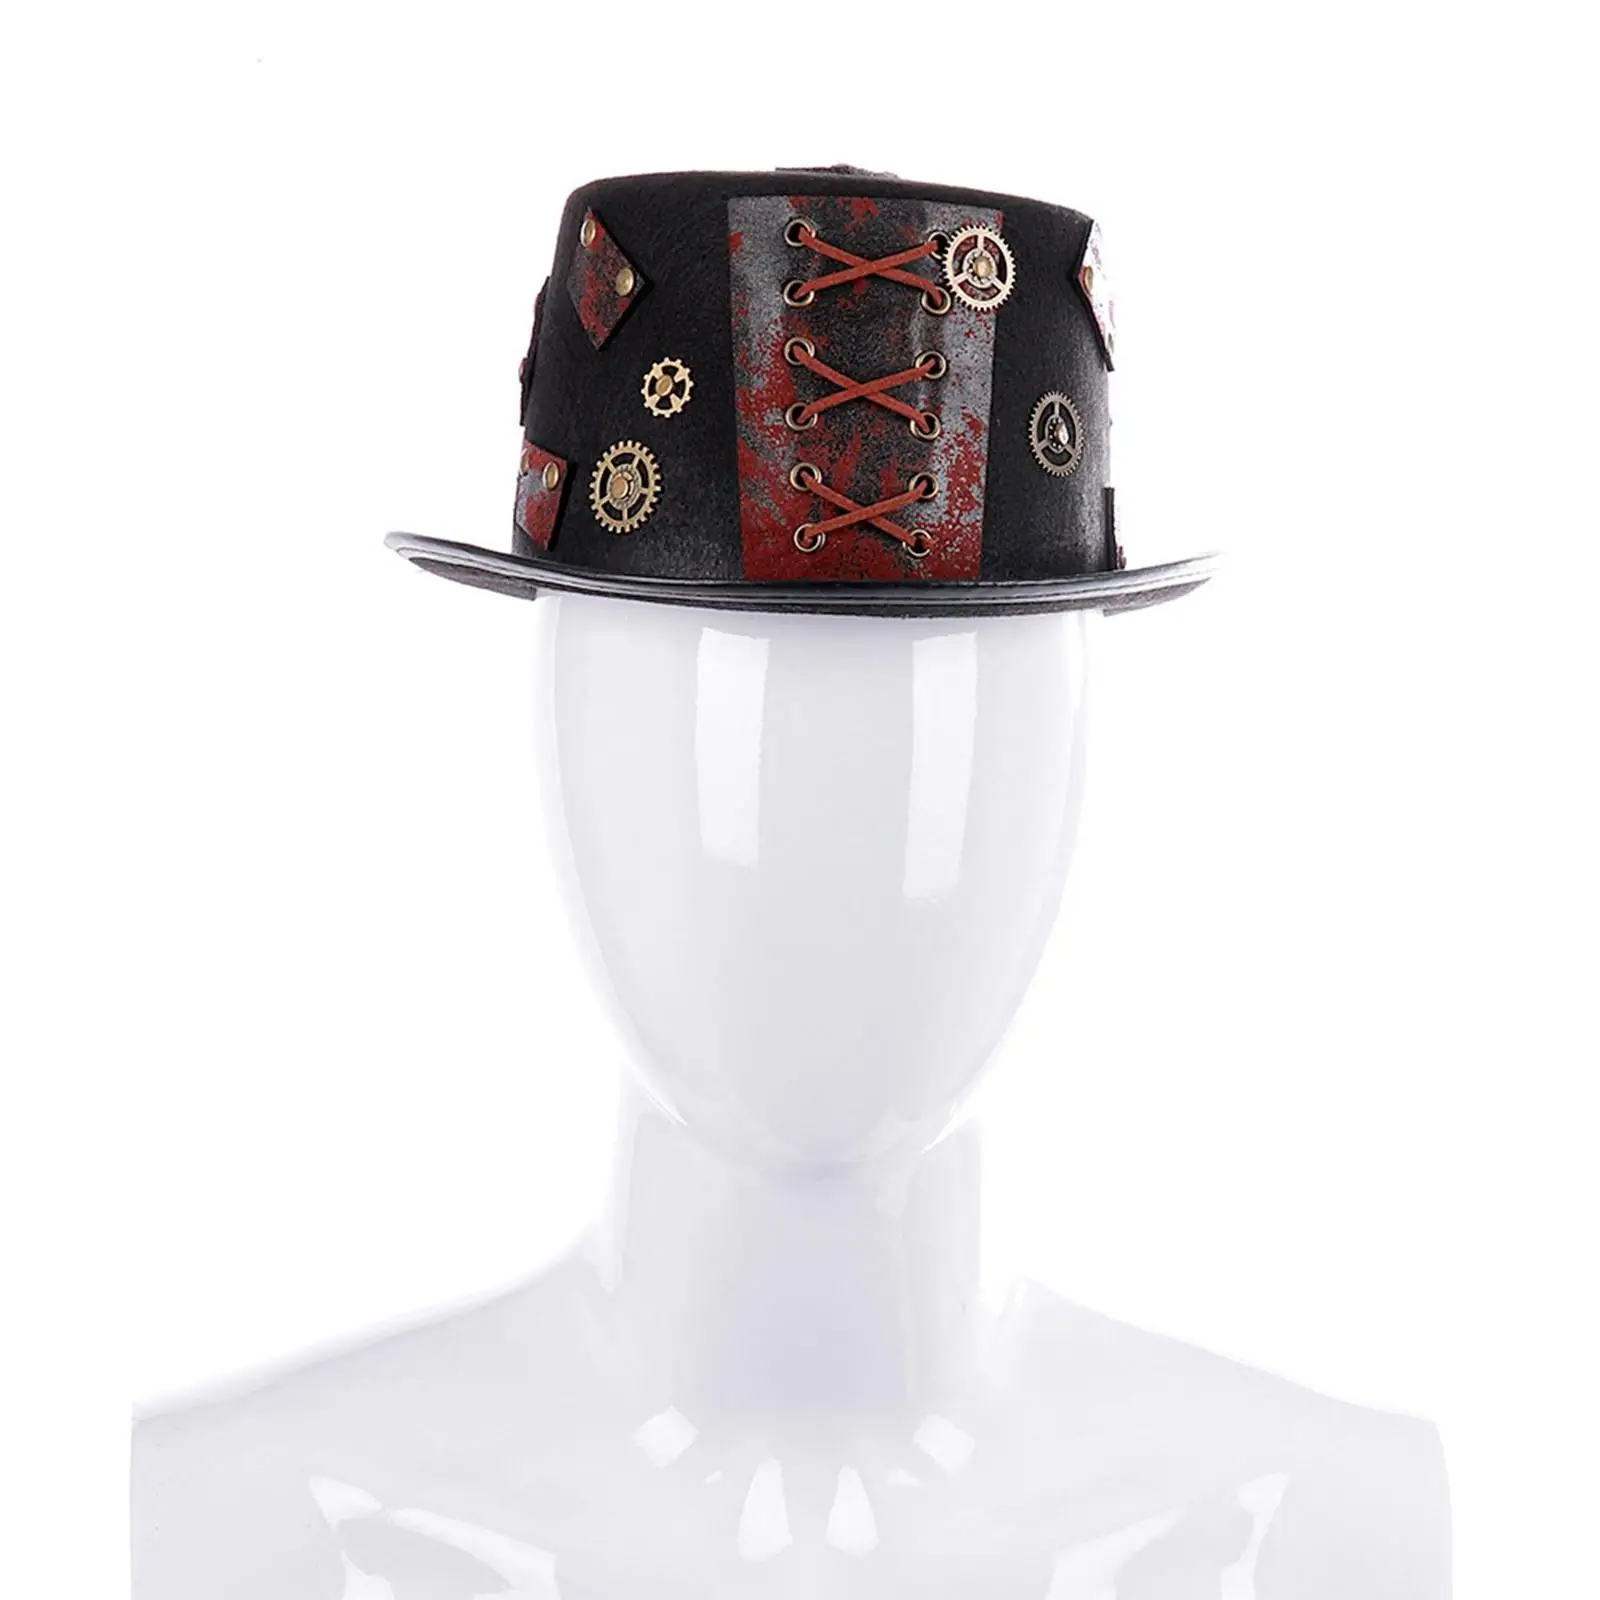 Punk Goth Steampunk Top Hat with String Gear Cosplay Costume Hat, Jazz Hat Masquerade Costume Party Gift Black Industrial Age